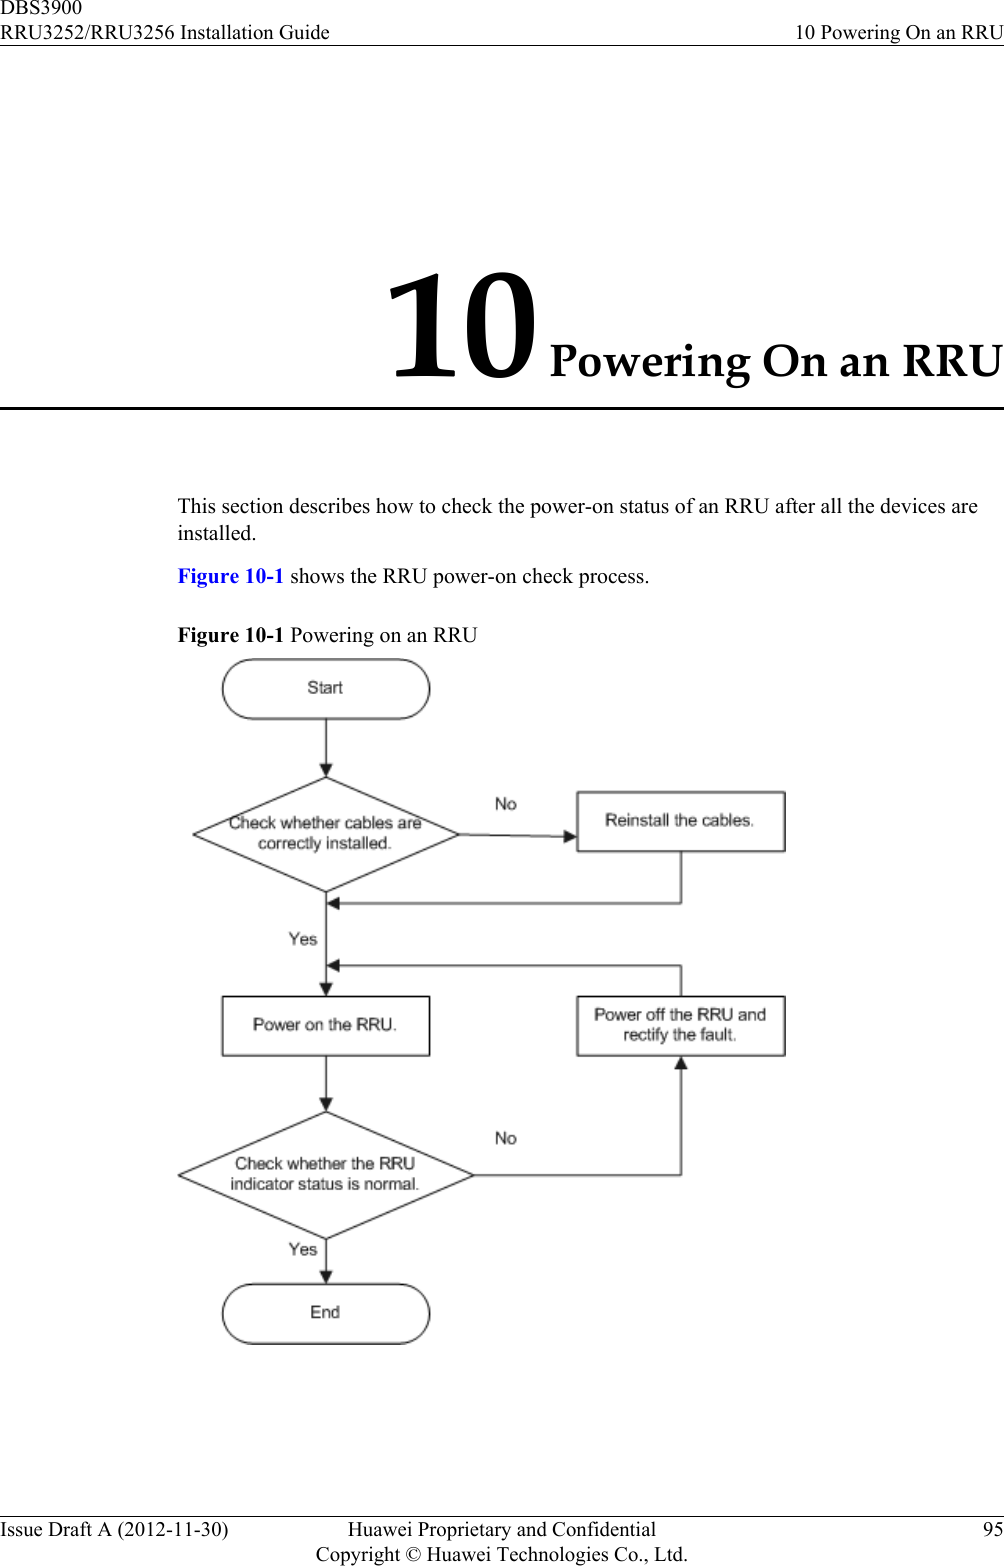 10 Powering On an RRUThis section describes how to check the power-on status of an RRU after all the devices areinstalled.Figure 10-1 shows the RRU power-on check process.Figure 10-1 Powering on an RRUDBS3900RRU3252/RRU3256 Installation Guide 10 Powering On an RRUIssue Draft A (2012-11-30) Huawei Proprietary and ConfidentialCopyright © Huawei Technologies Co., Ltd.95